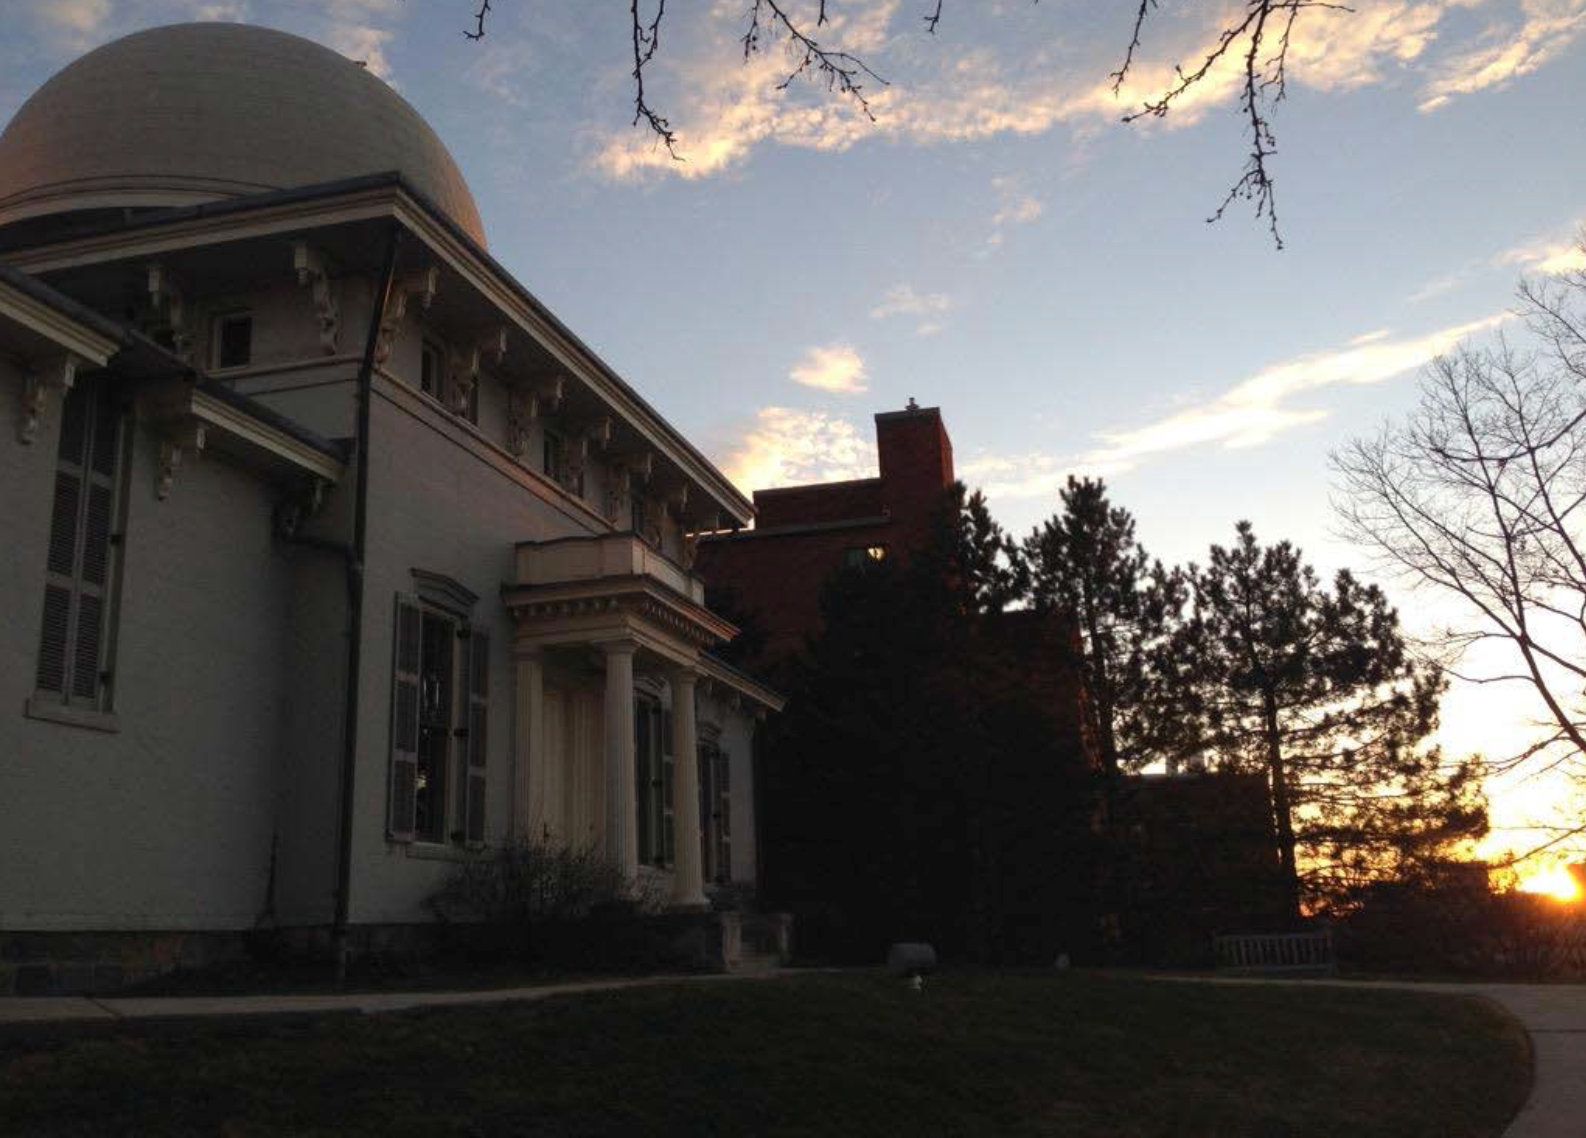 Picture of the Detroit Observatory at sunset.